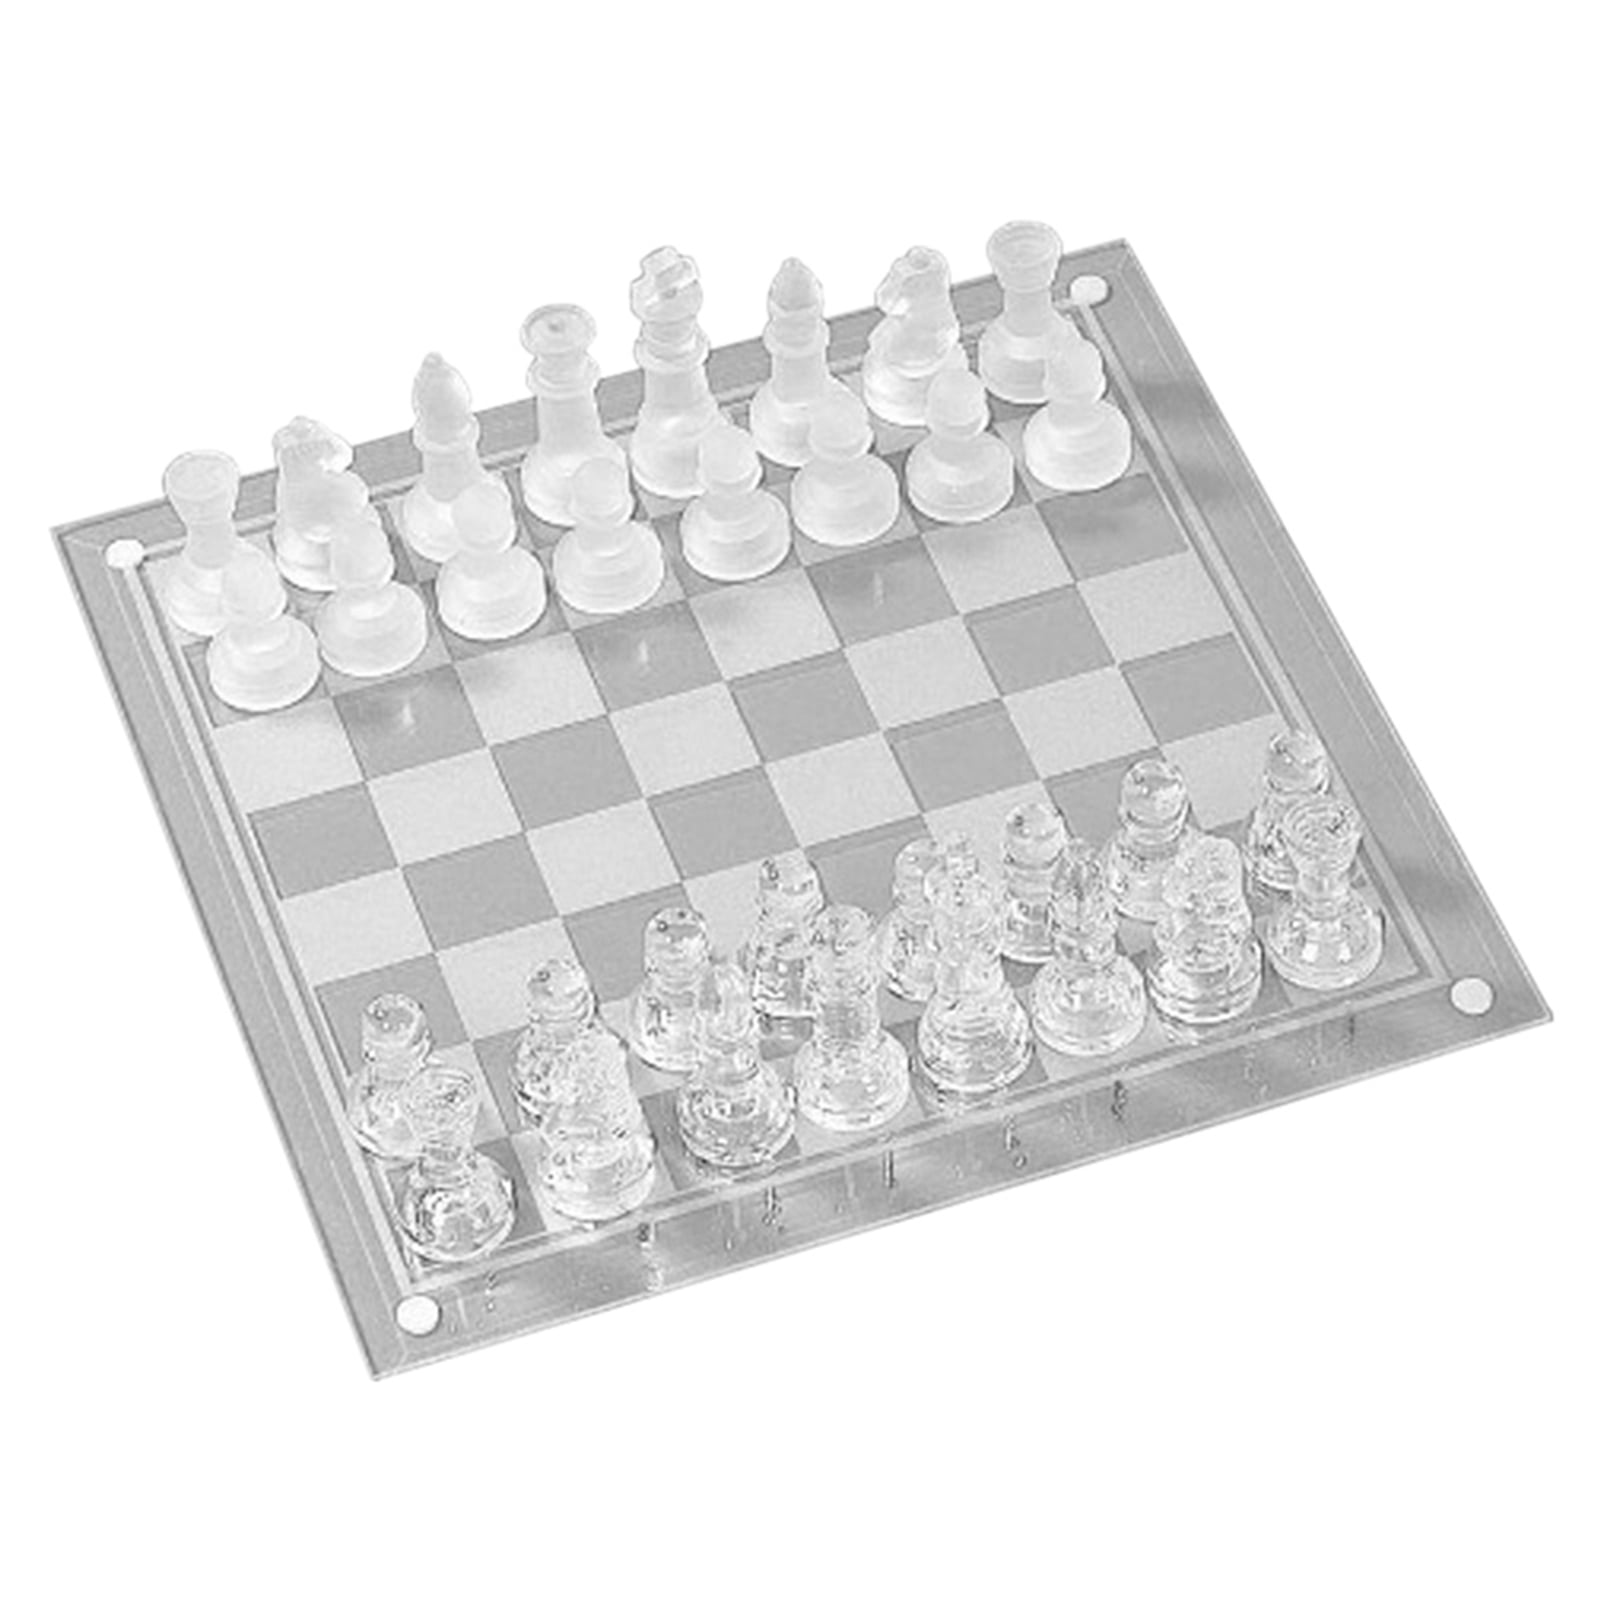 Details about   GLASS BOARD TRADITIONAL CHESS SET GAME UNIQUE BEAUTIFUL GIFT 32 PIECES FUN PARTY 